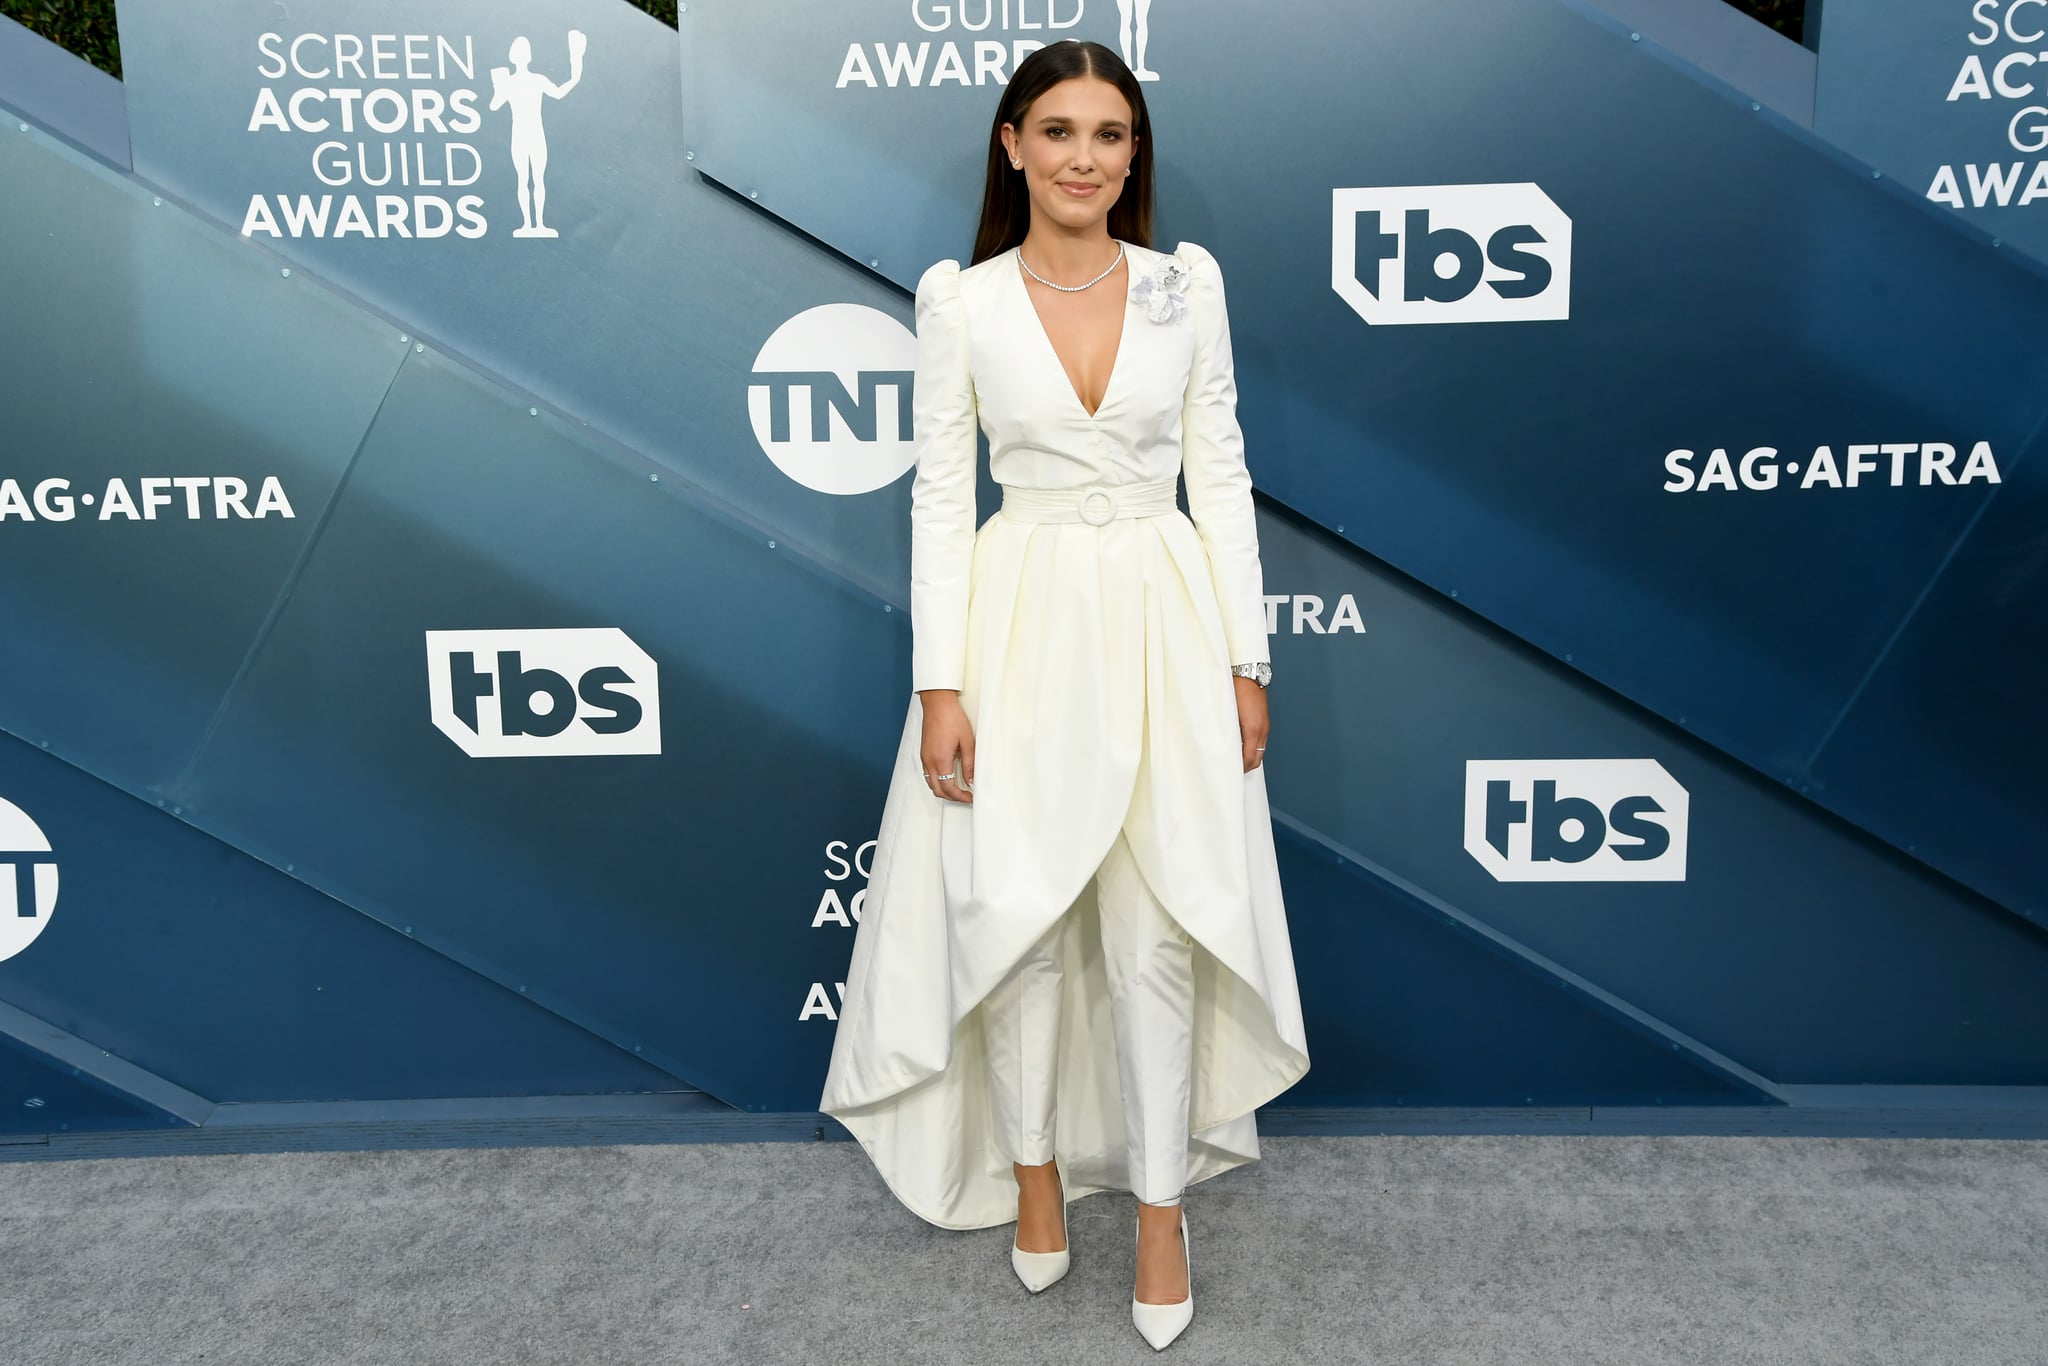 Millie Bobby Brown White Outfit at the 2020 SAG Awards